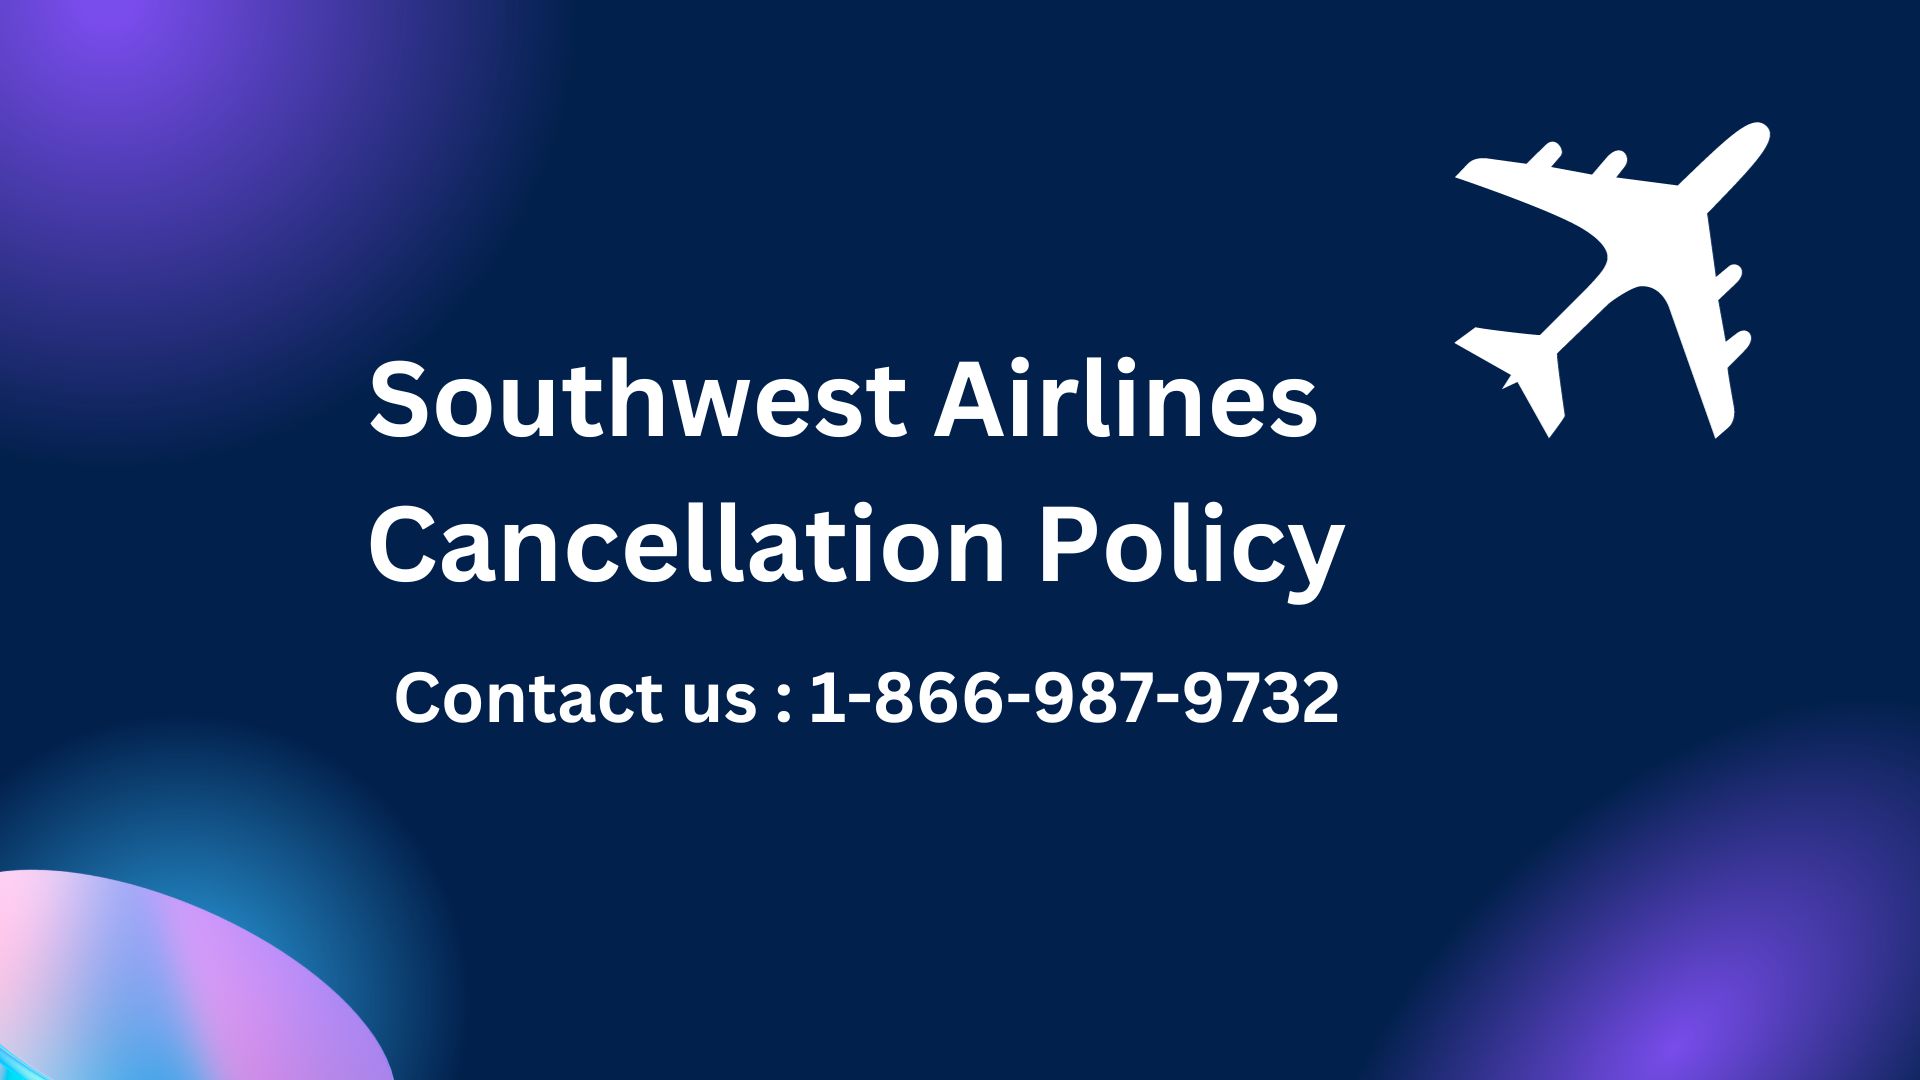 Southwest Airlines Cancellation Policy, Refund Policy